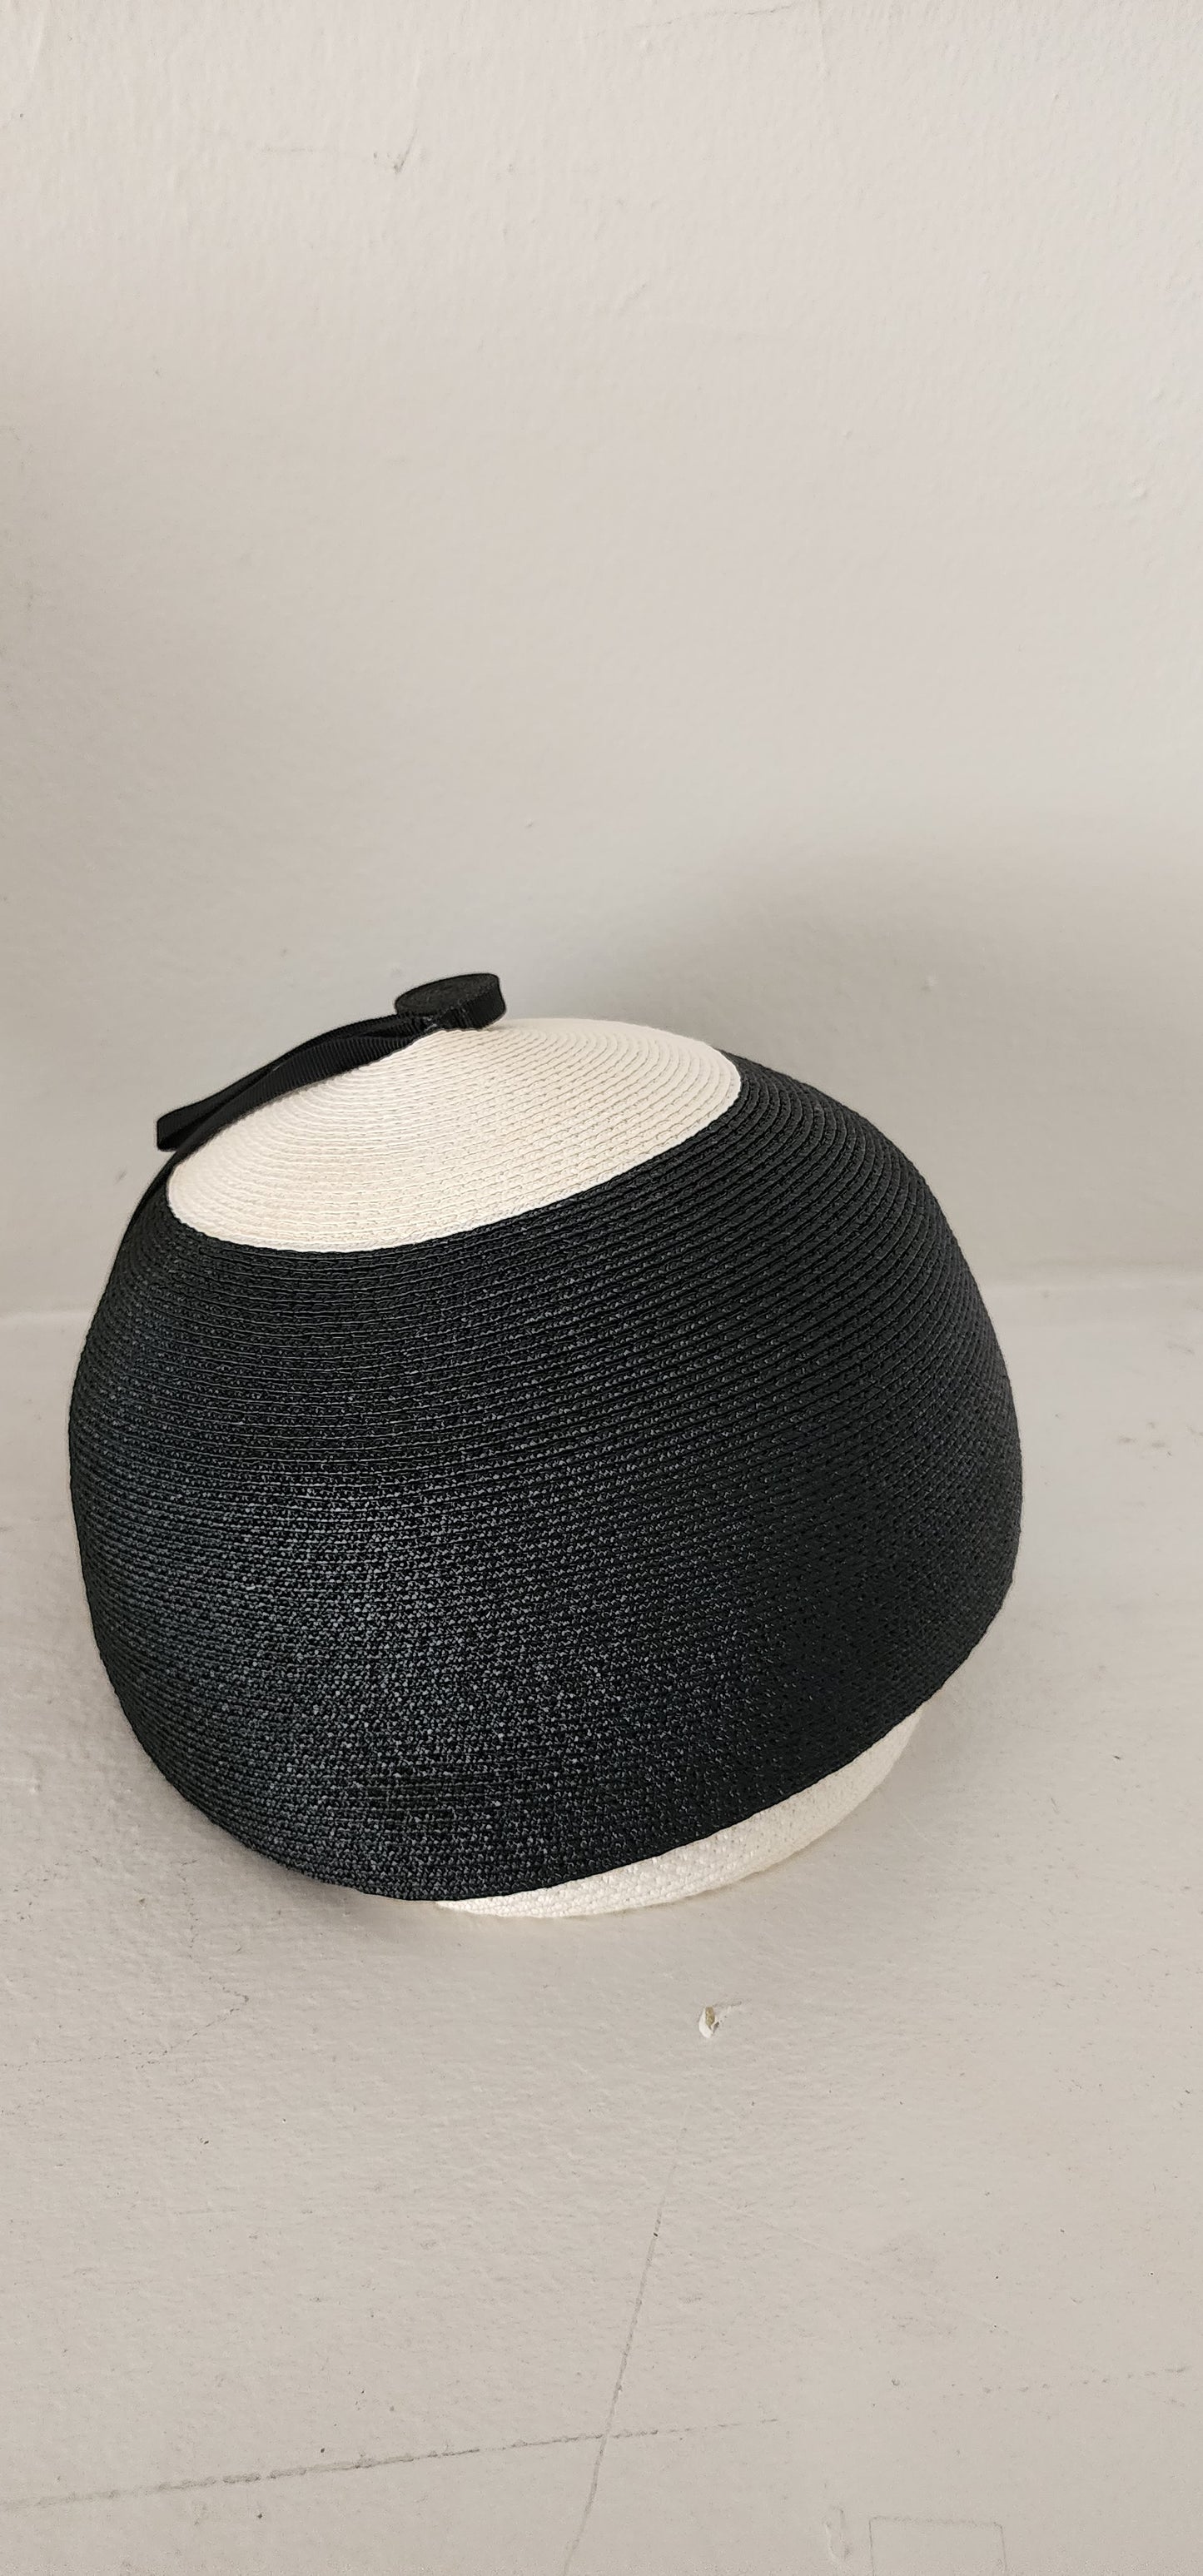 60s Mod Hat in Black & White Straw Domed Cloche by Doree of New York